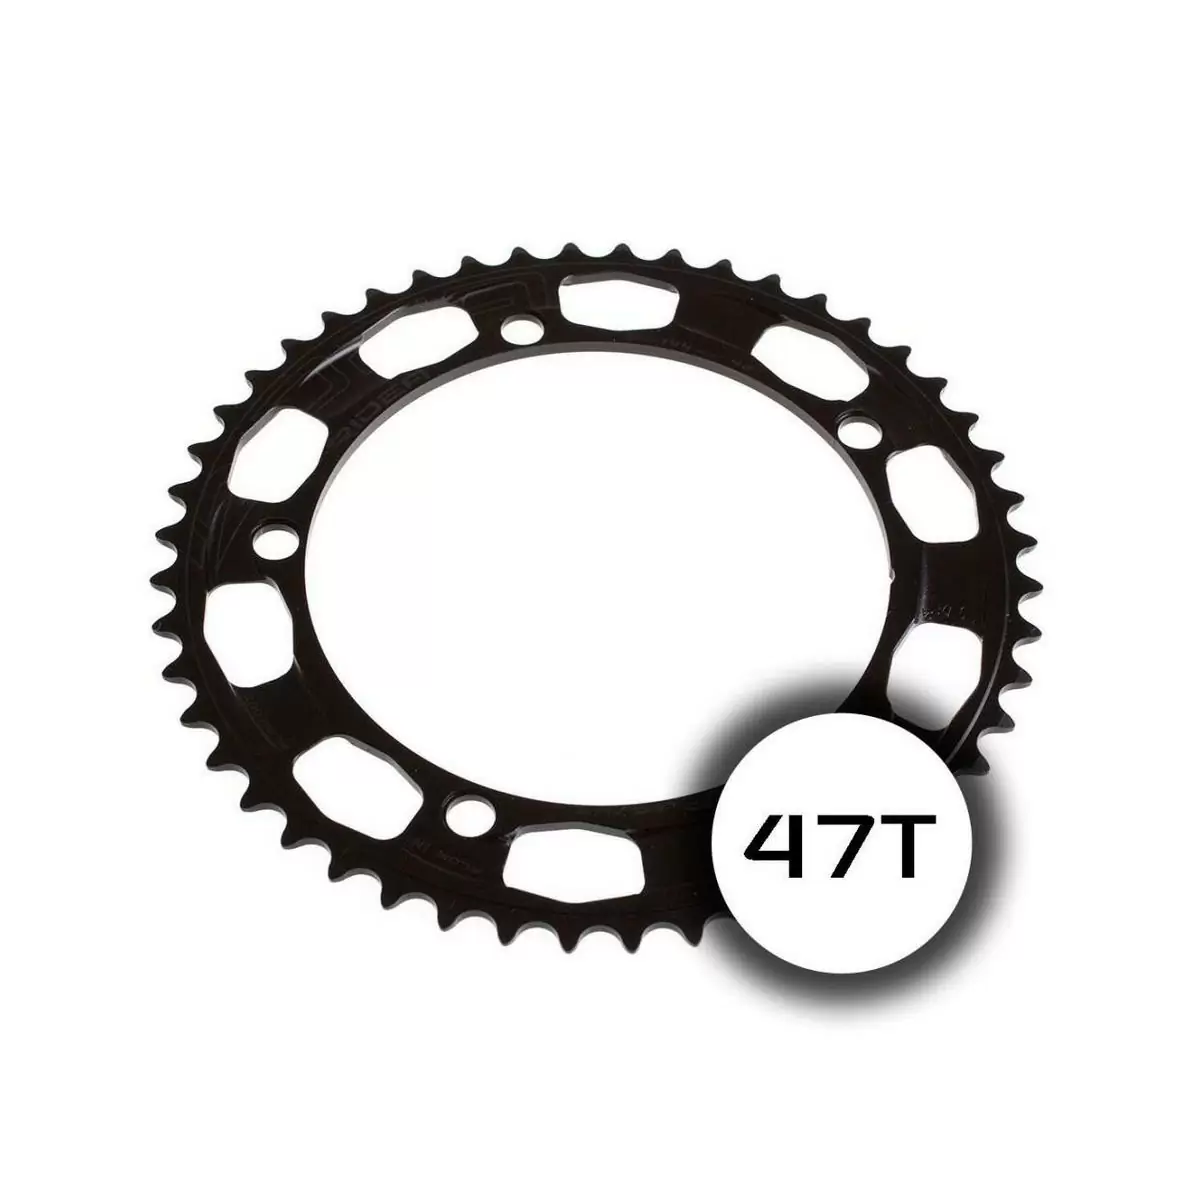 chainring lami flow fixed gear track 47t 144 mm black - image